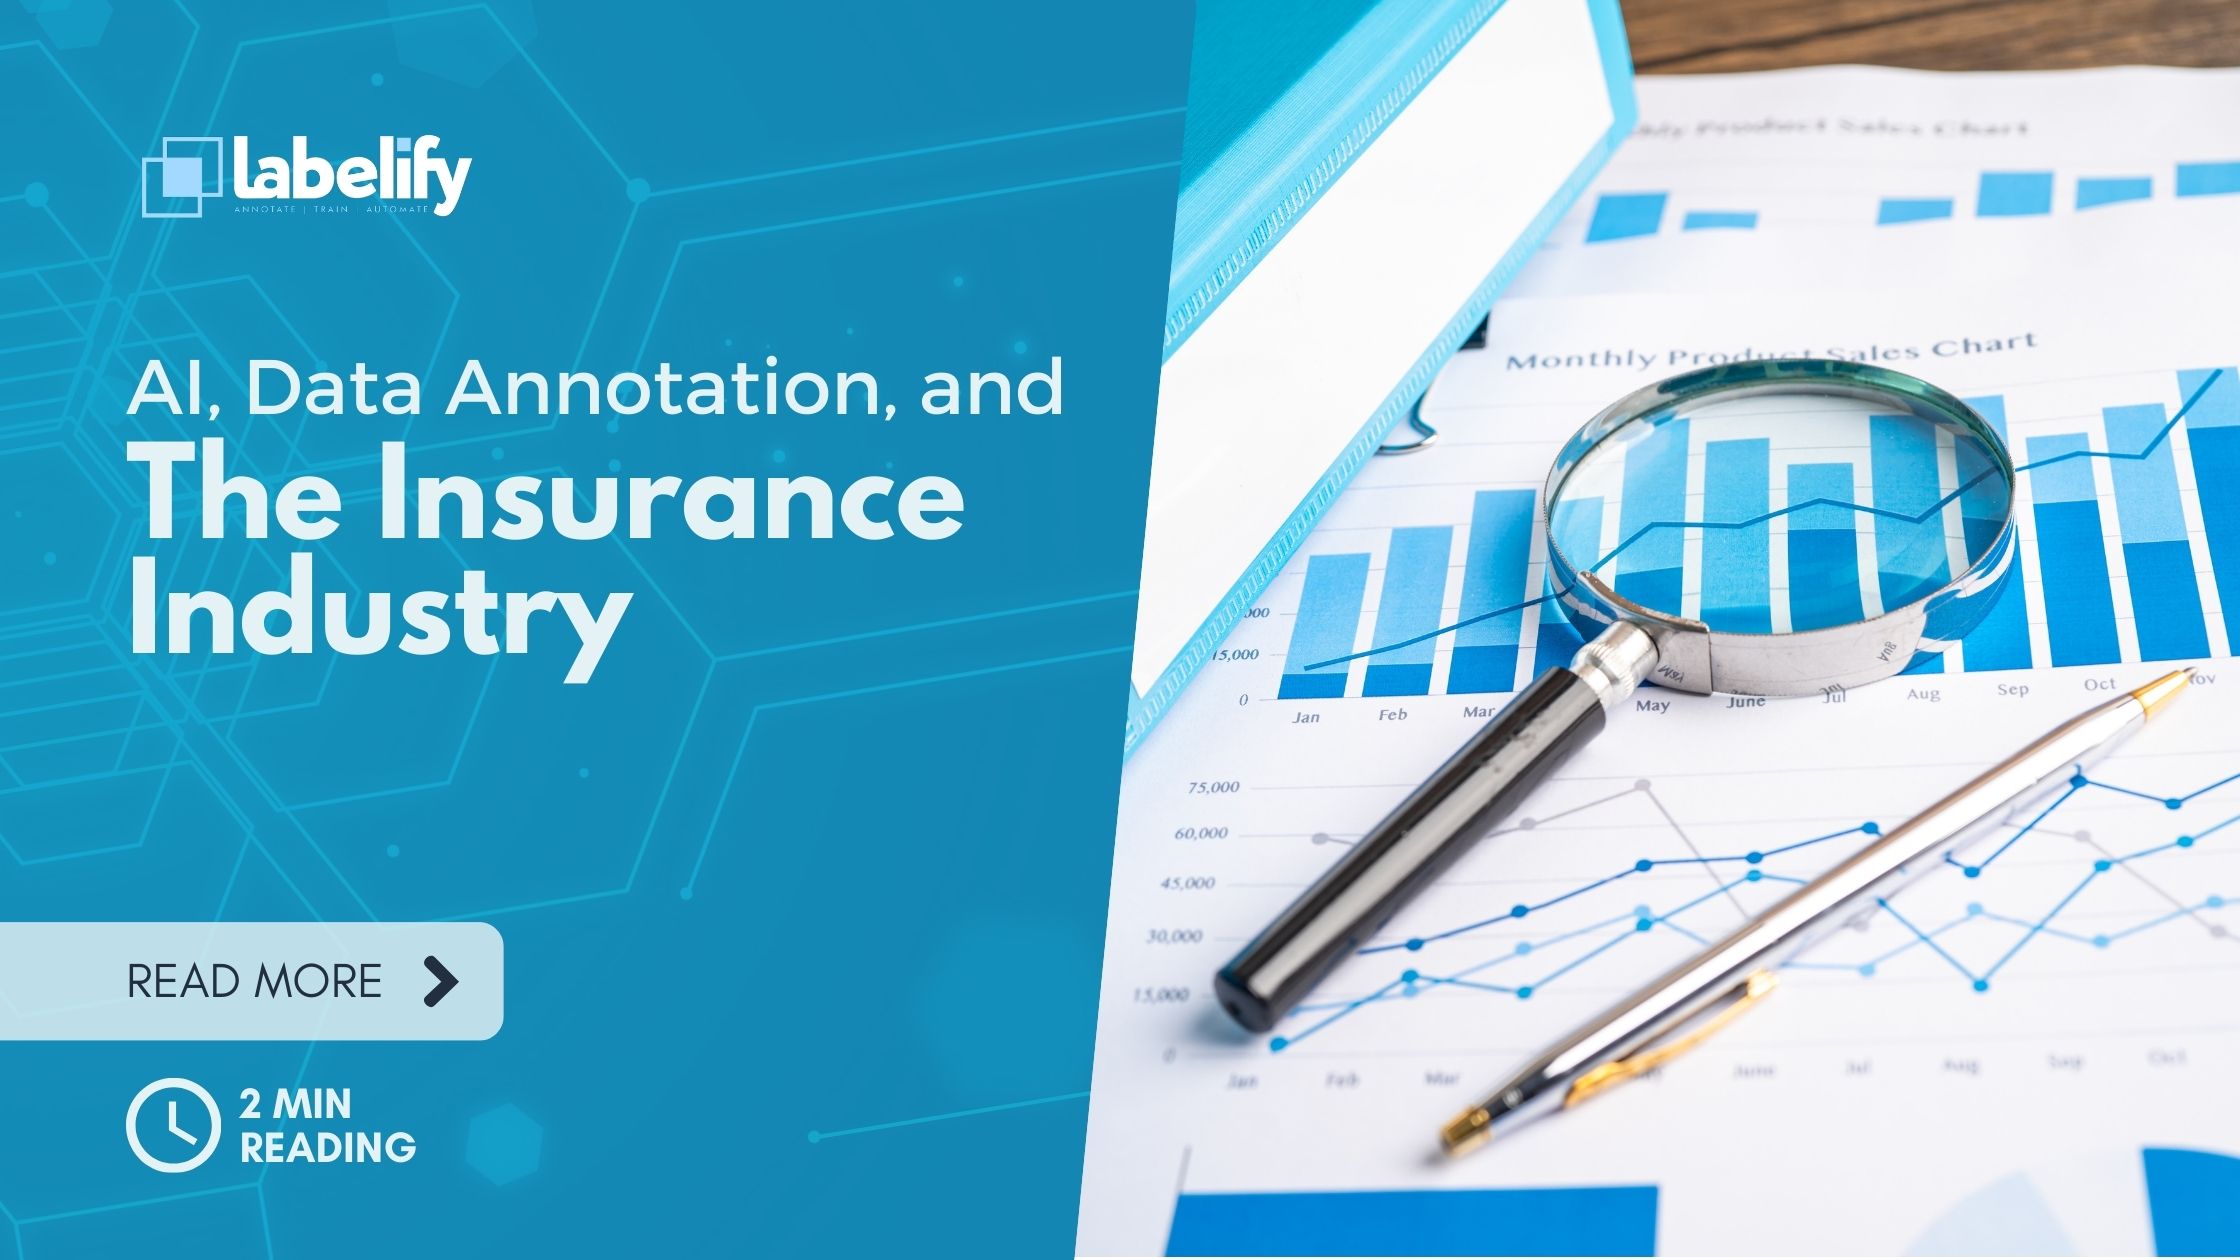 Data Annotation in insurance